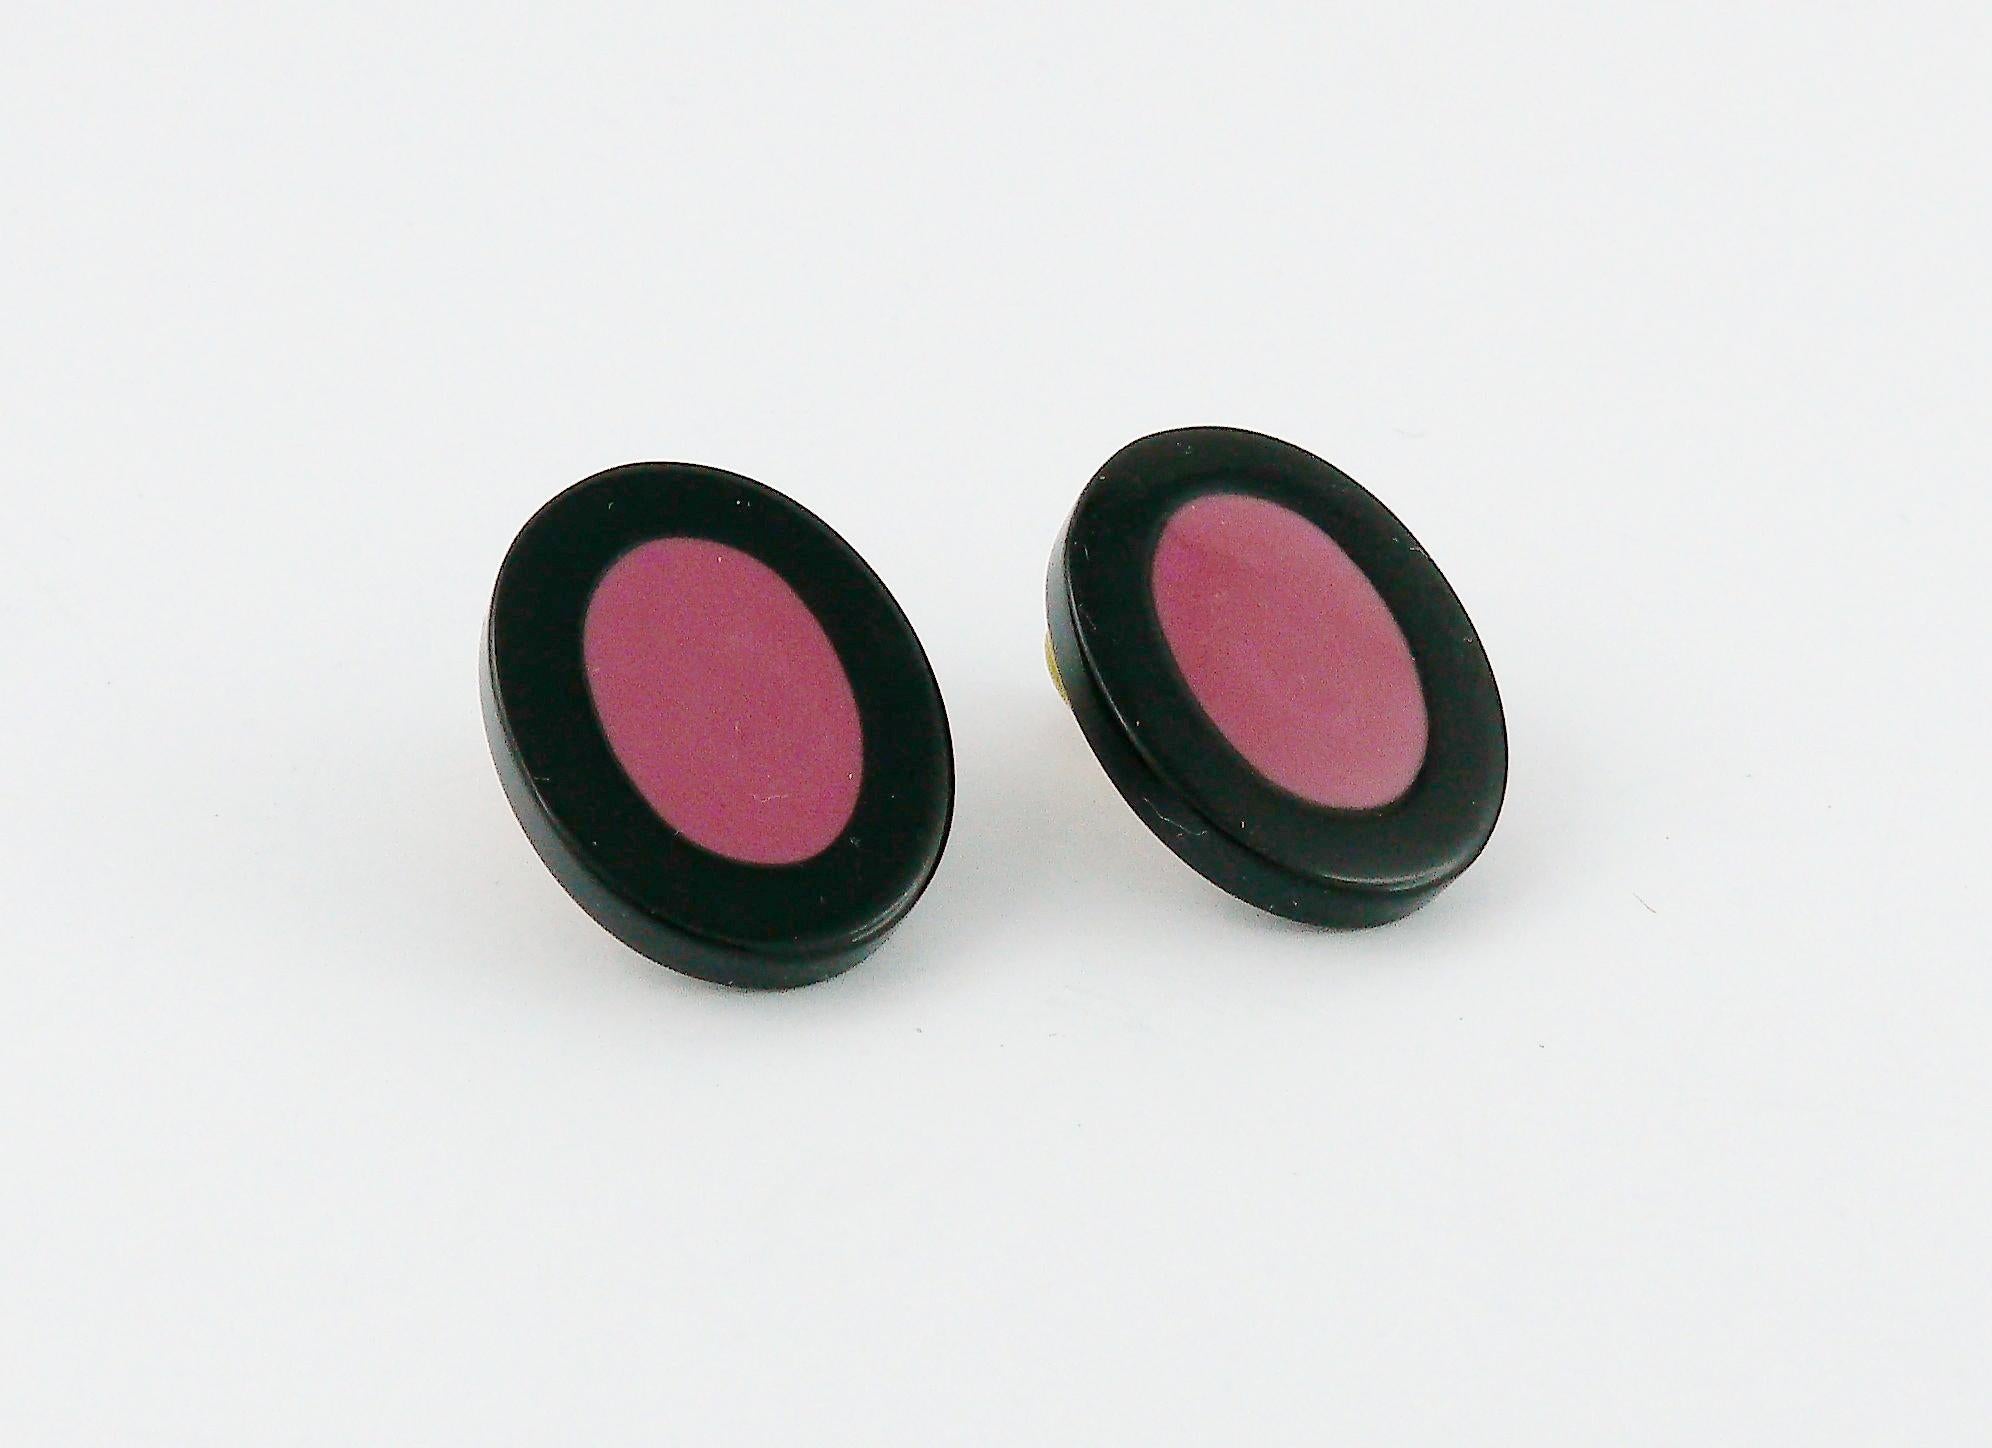 YVES SAINT LAURENT vintage abstraction clip-on earrings featuring a black and pink resin oval.

Embossed YSL.

Indicative measurements : height approx. 2.2 cm (0.87 inch) / width approx. 1.8 cm (0.71 inch).

JEWELRY CONDITION CHART
- New or never